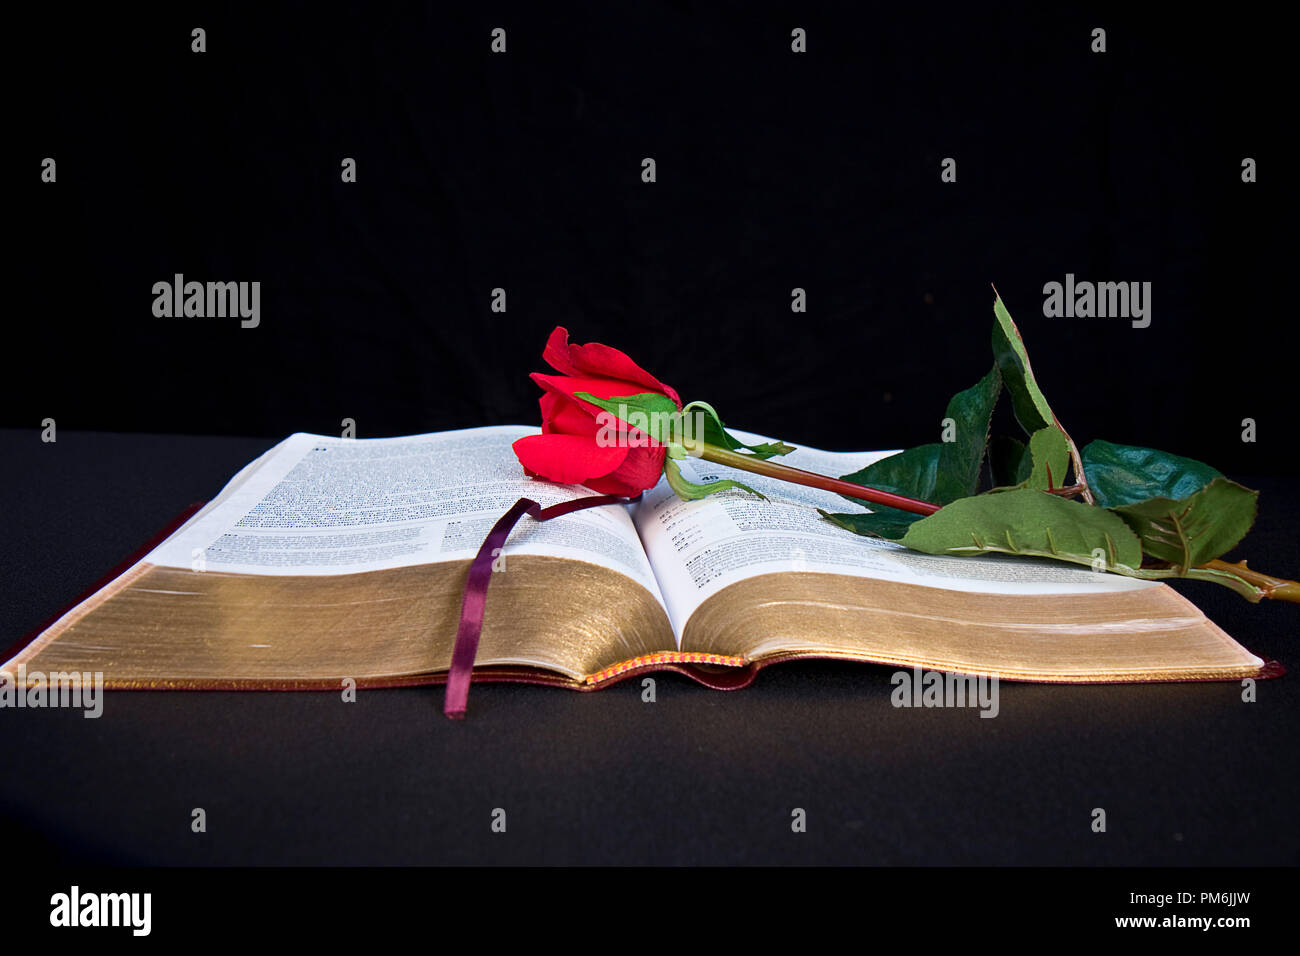 Bible opened up with worn gold on pages isolated on black background, Some images have red rose. Stock Photo